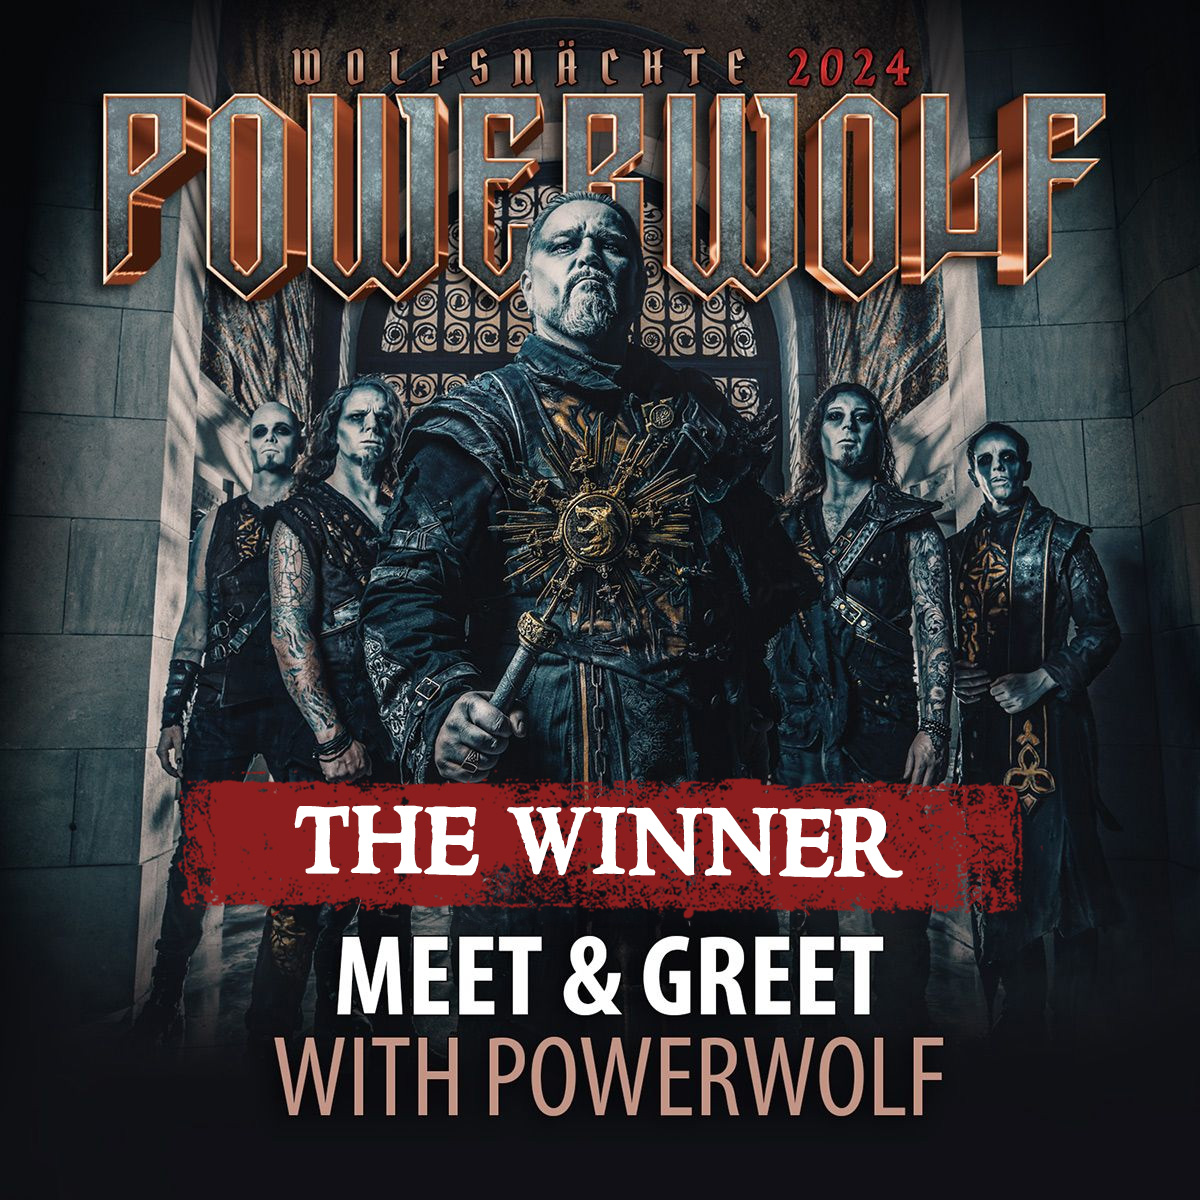 When Napalm Records published the 'Win an exclusive meet & greet with Powerwolf', we were overwhelmed by the thousands of participants across all channels! Congratulations to the lucky winner Lusine Shirinyan and a huge thanks to every single one of you who participated!